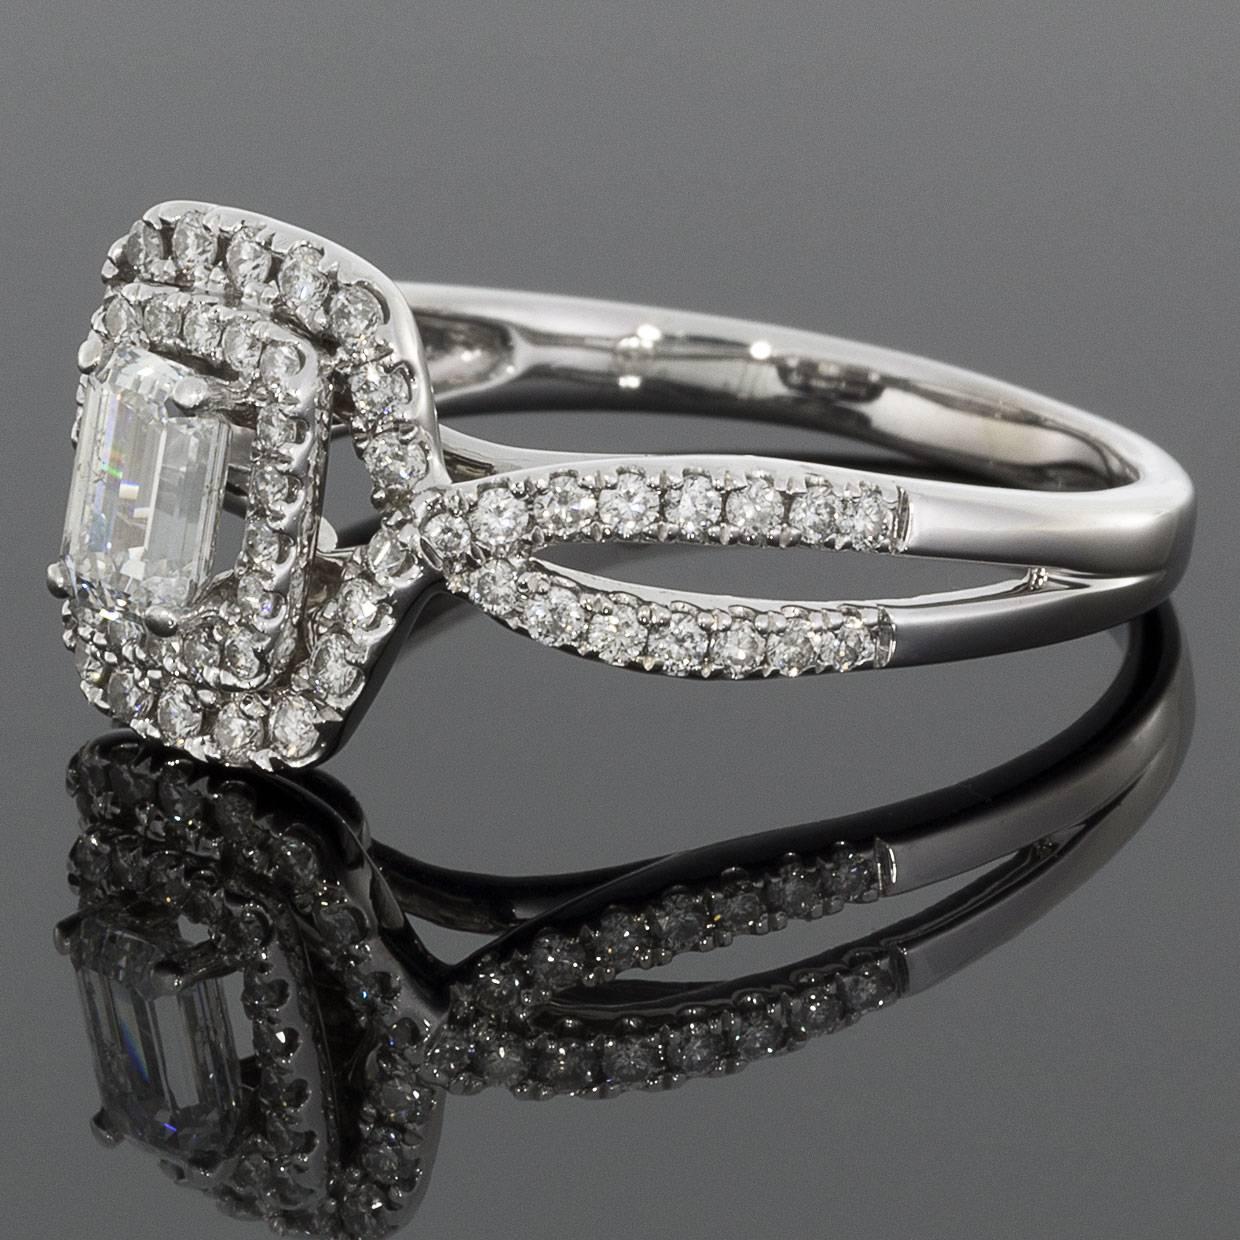 This gorgeous halo engagement ring has a big look with its lovely double halo flowing gracefully from the twisted, split shank. The center diamond is a 1/2 carat emerald cut diamond that grades as H/SI1 in quality. It is prong set in the center of